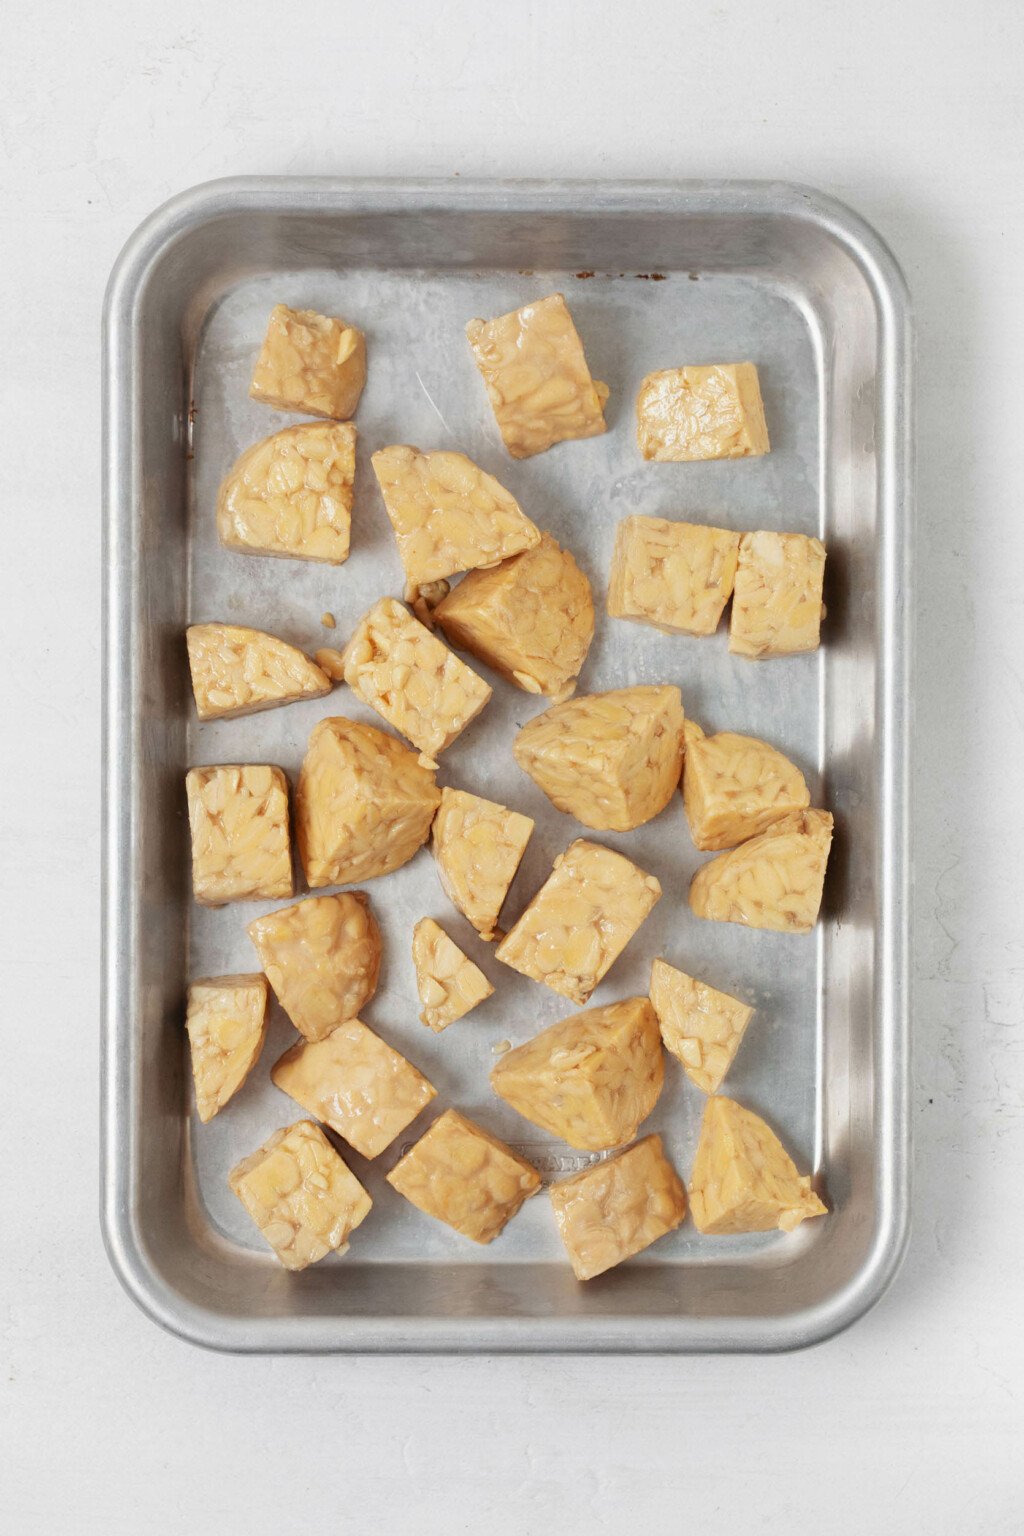 A small baking tray holds cubes of tempeh, which will become seasoned tempeh nuggets.